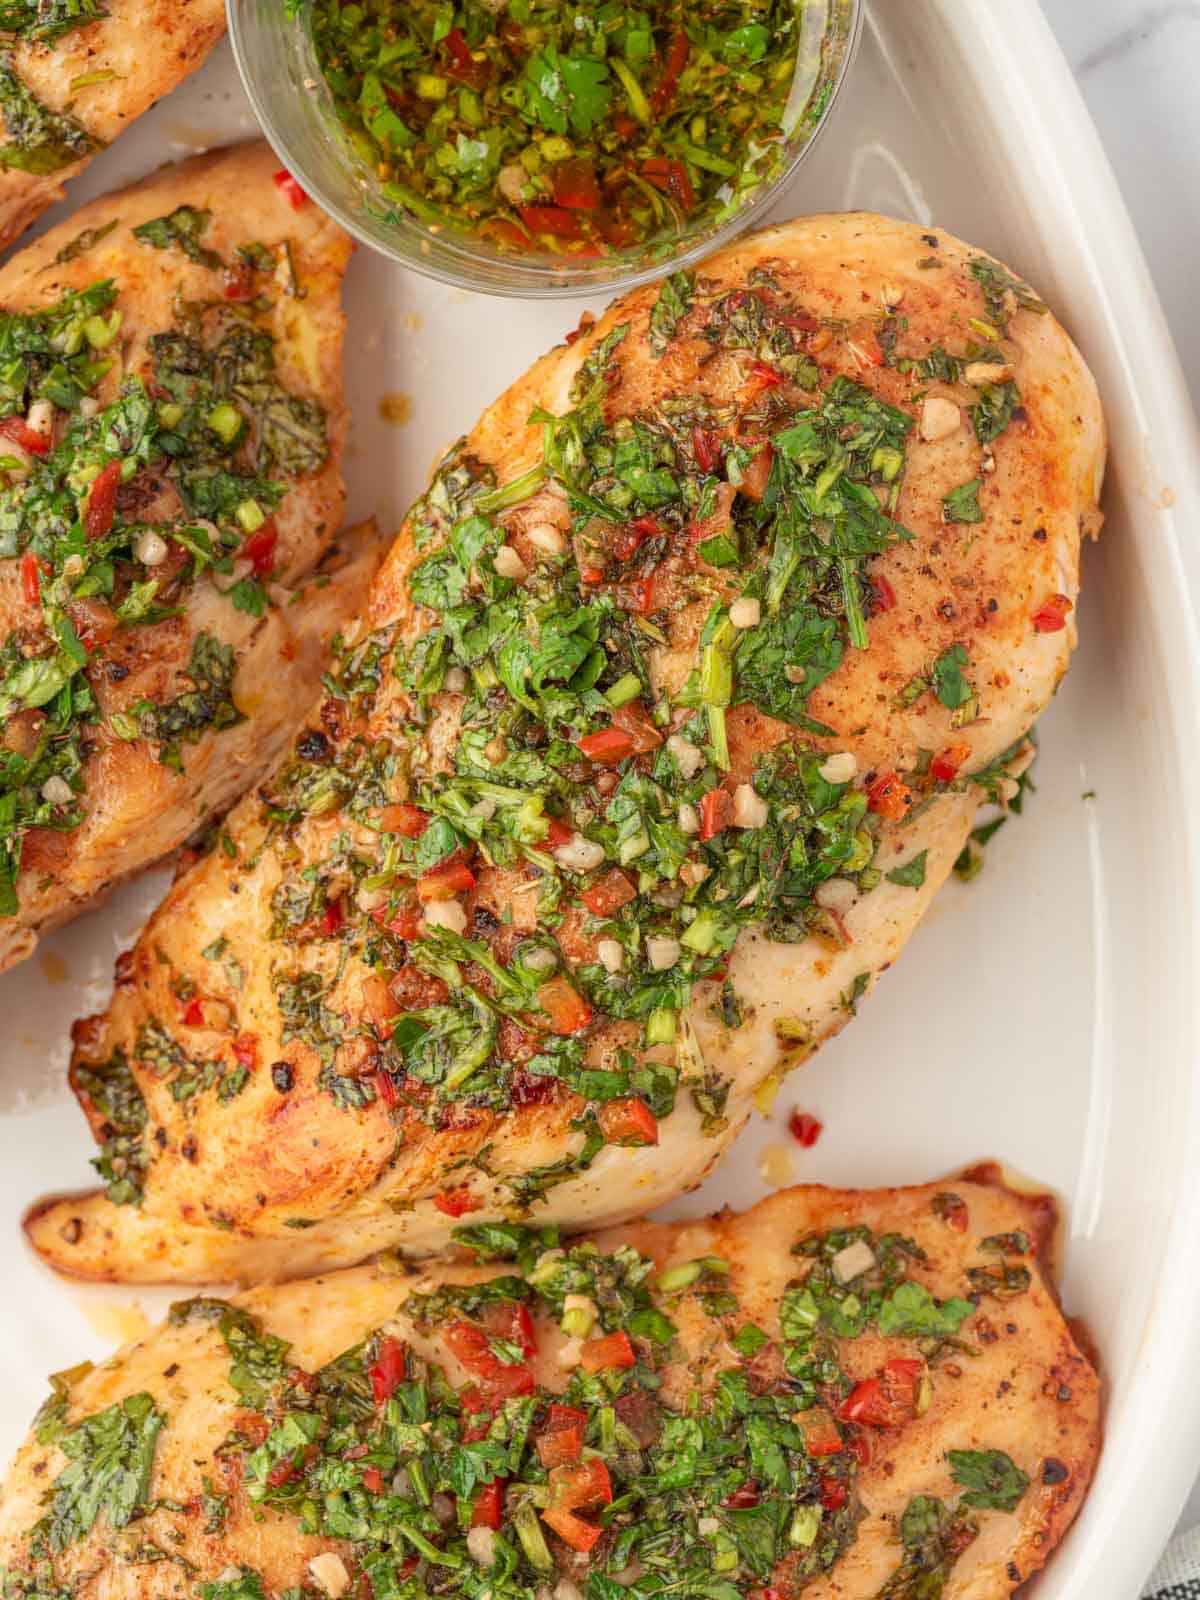 Baked chicken with chimichurri sauce on a plate.